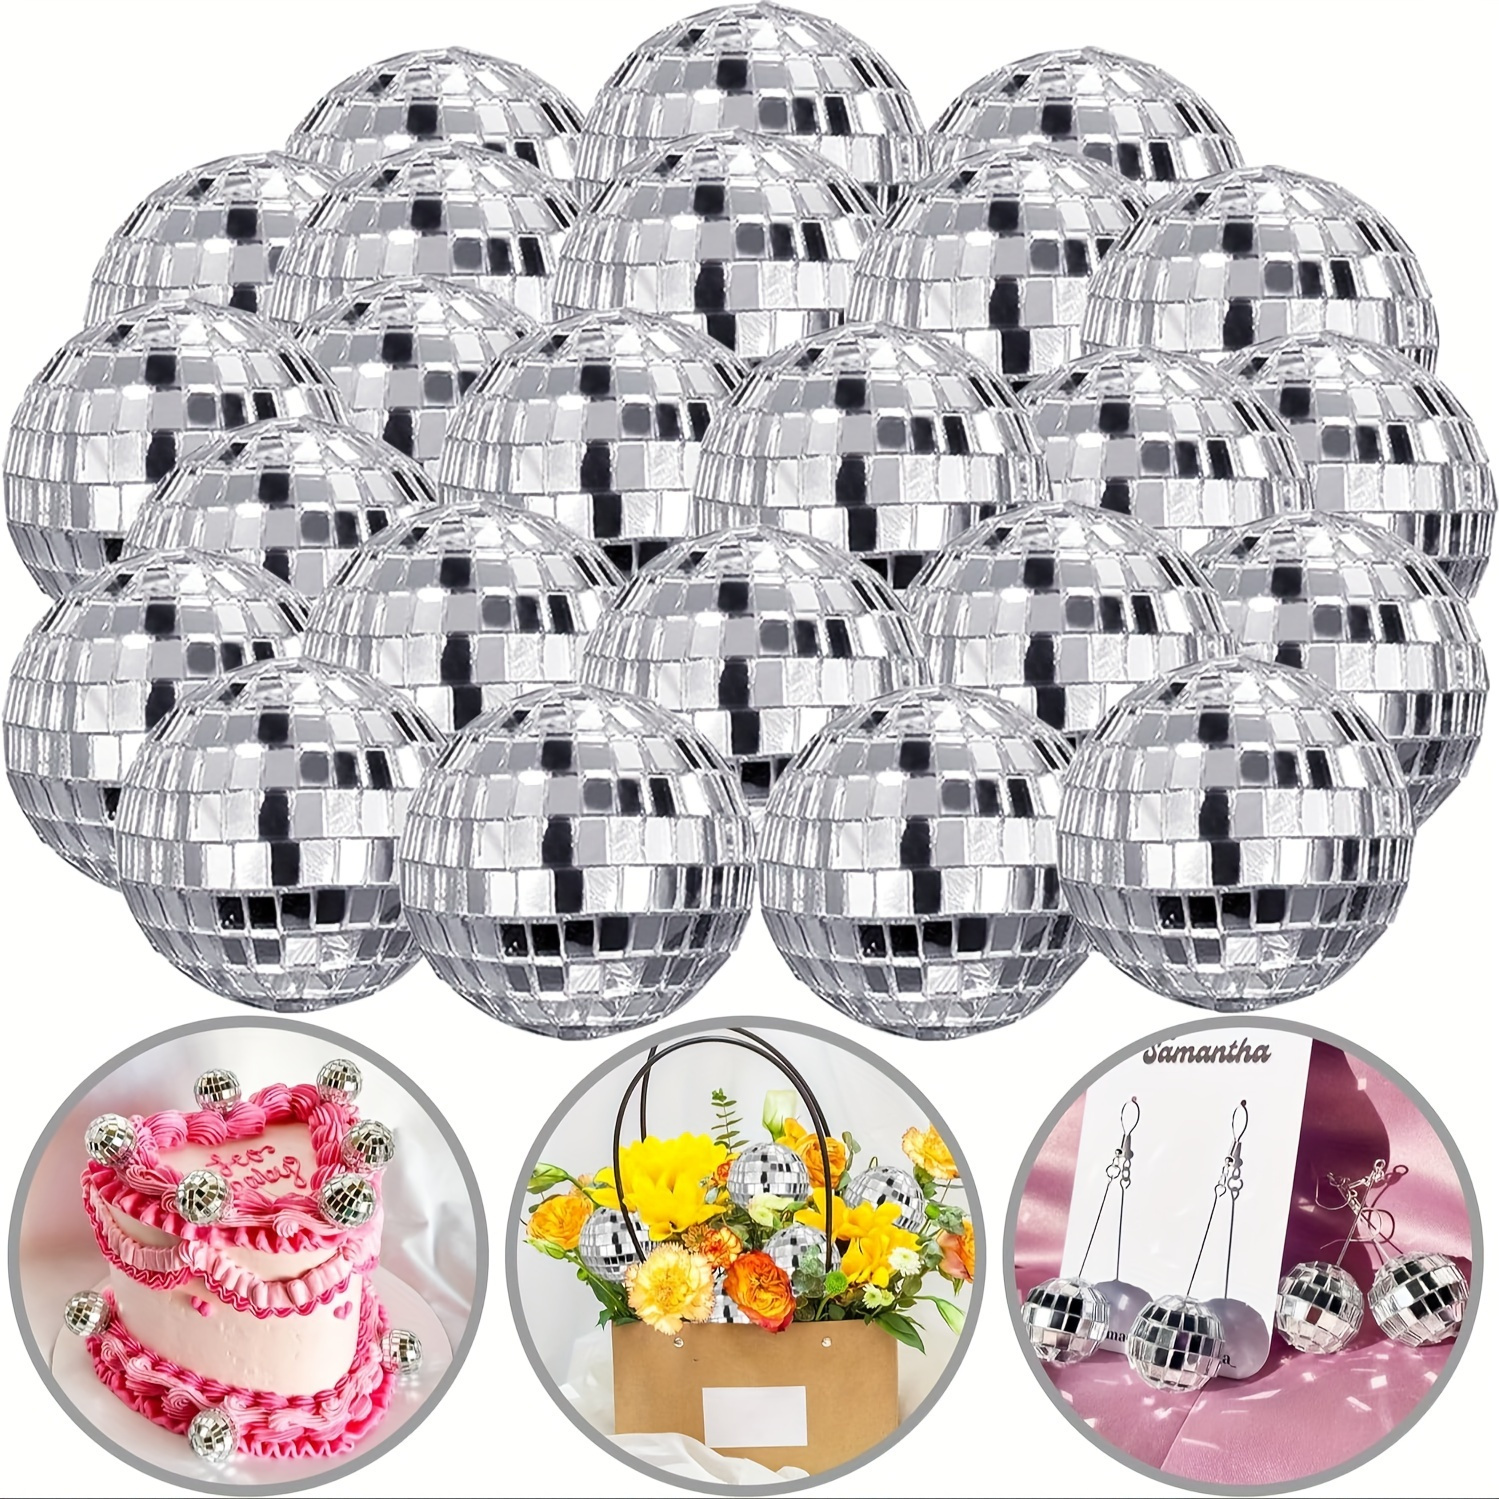 

20pcs Mini Disco Balls - Silvery Reflective Mirror Decorations For 70s Theme Parties, Christmas & Festive Room Aesthetics | No Power Needed, Glass Material | Ideal For Halloween & All Occasions